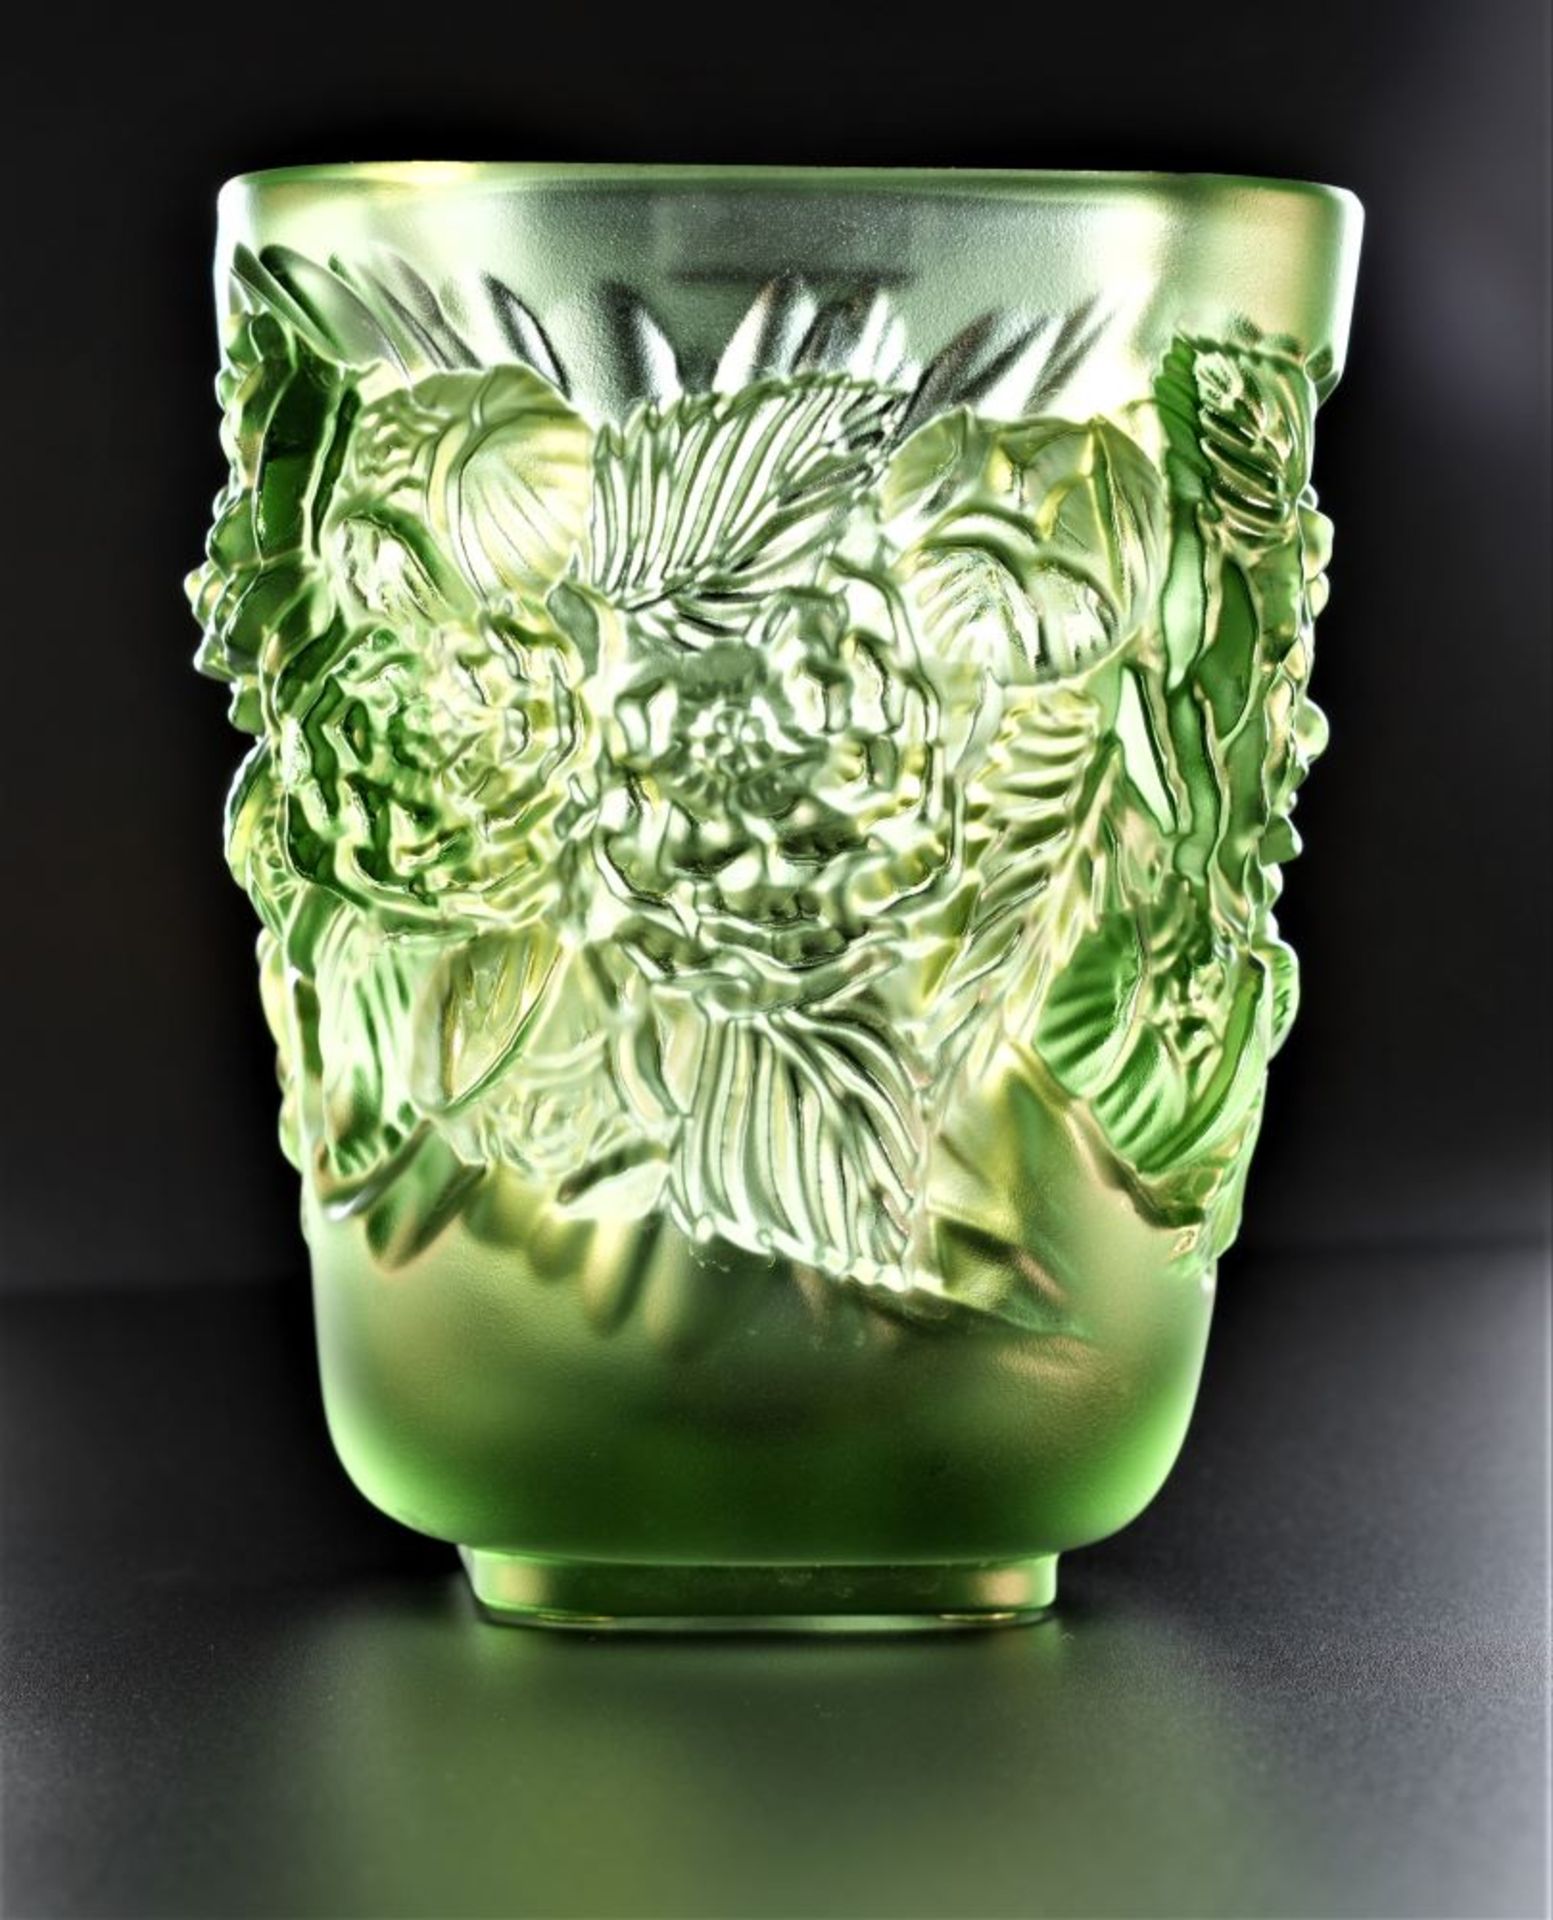 A LALIQUE Pivoines Small Vase in Green Crystal Depicting Peony Flowers Product Code: 10708800. - Bild 2 aus 3